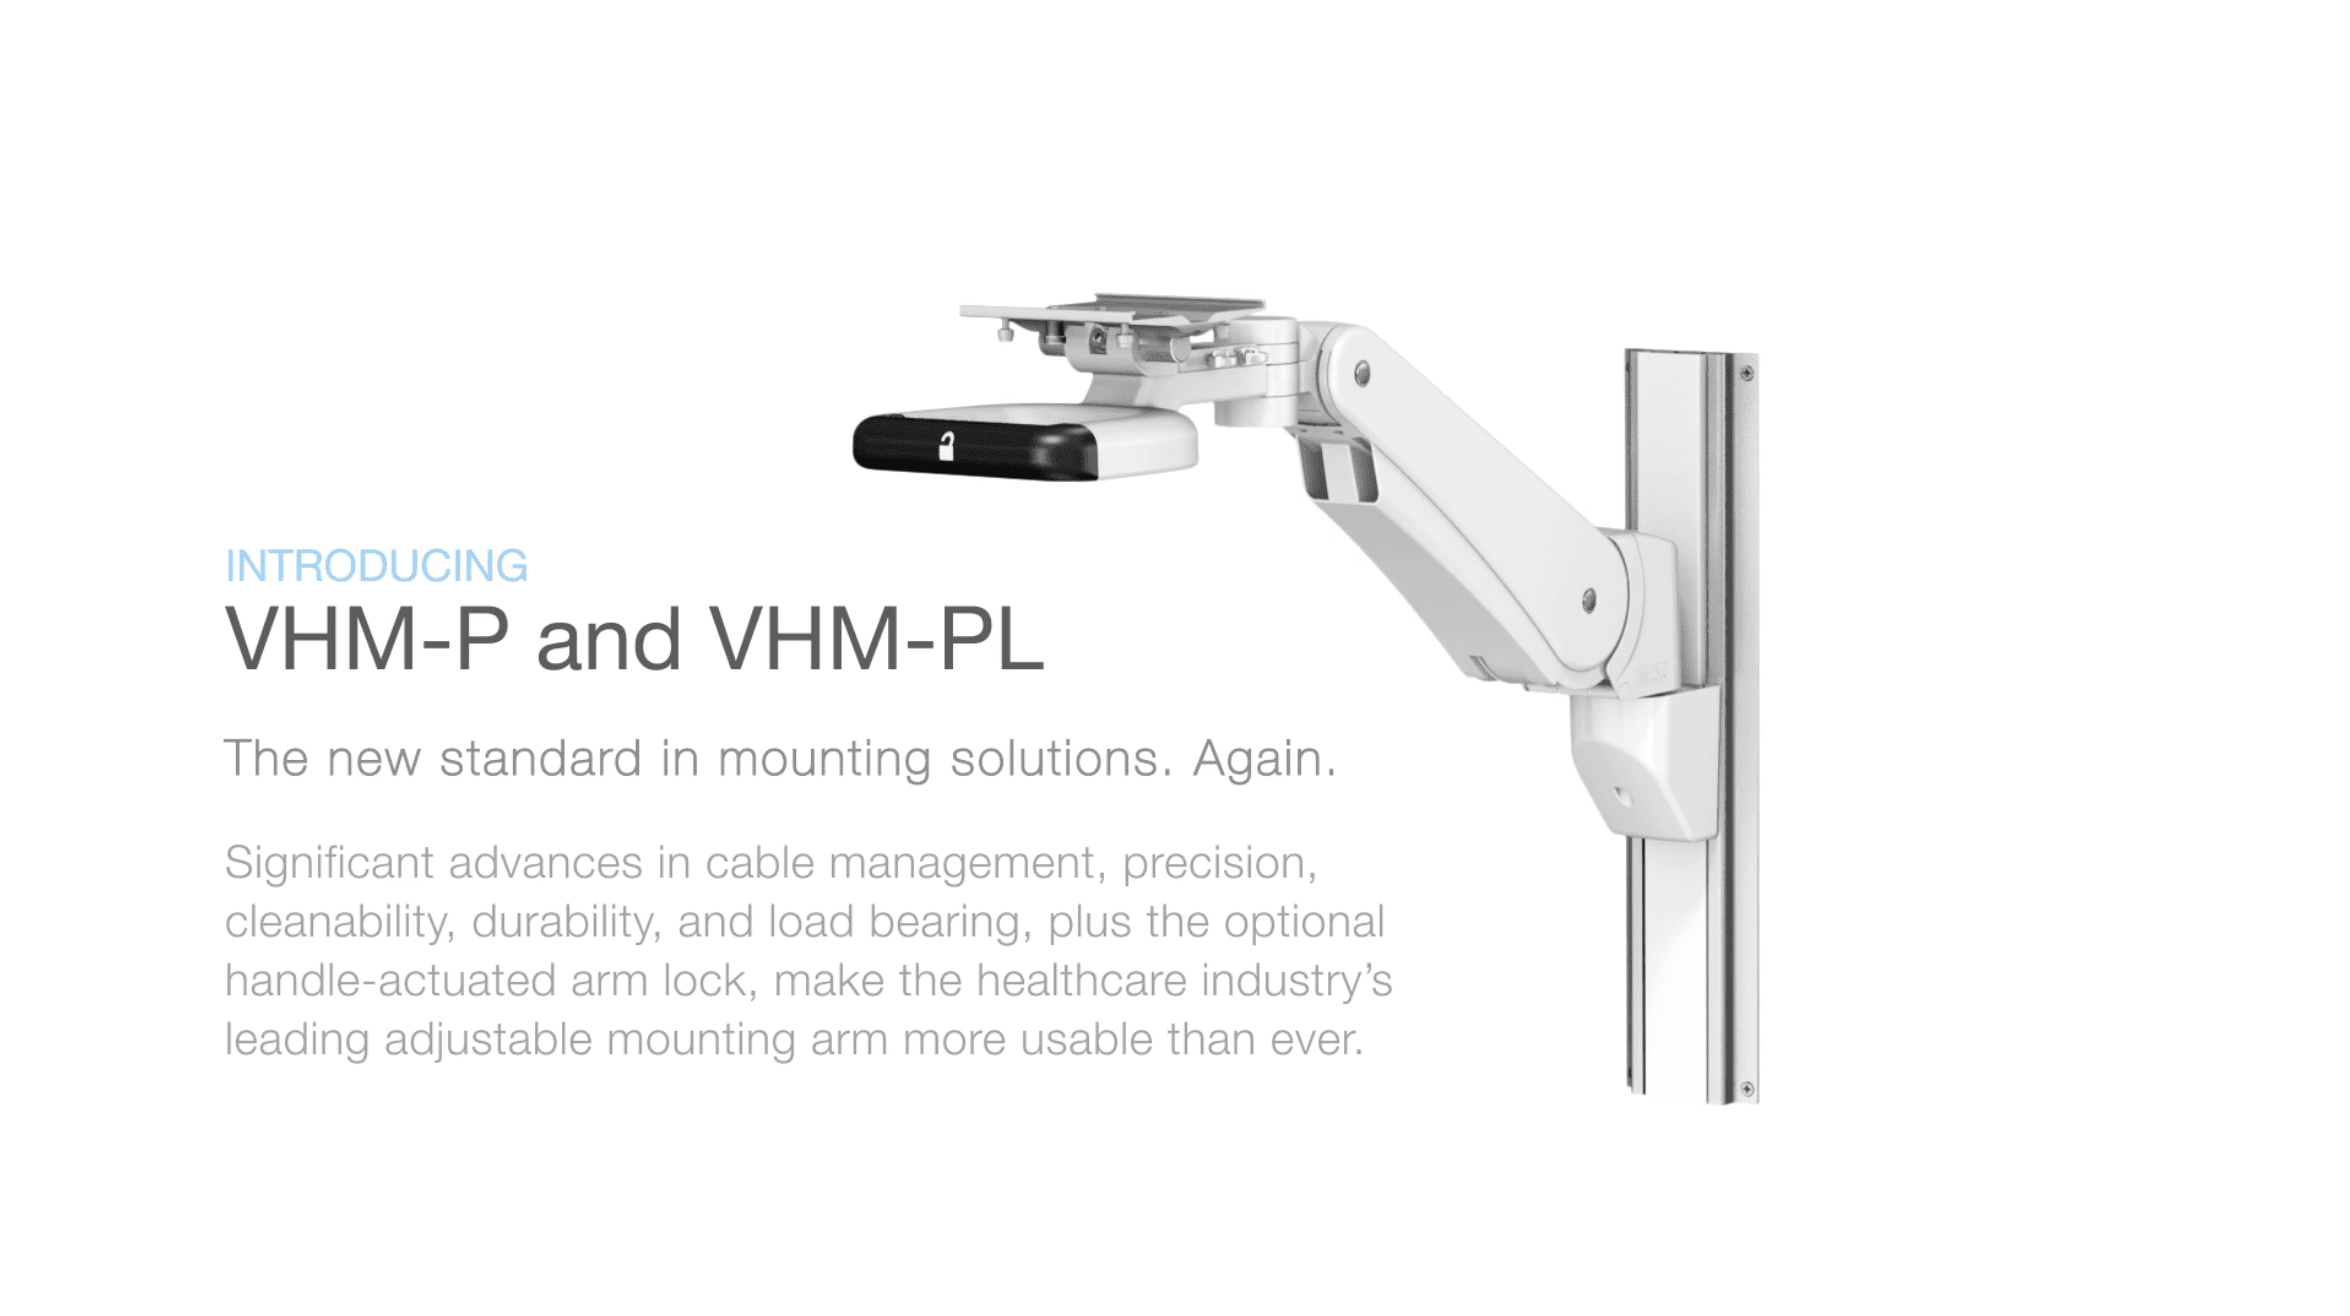 Variable Height Arm VHM-P/L Overview